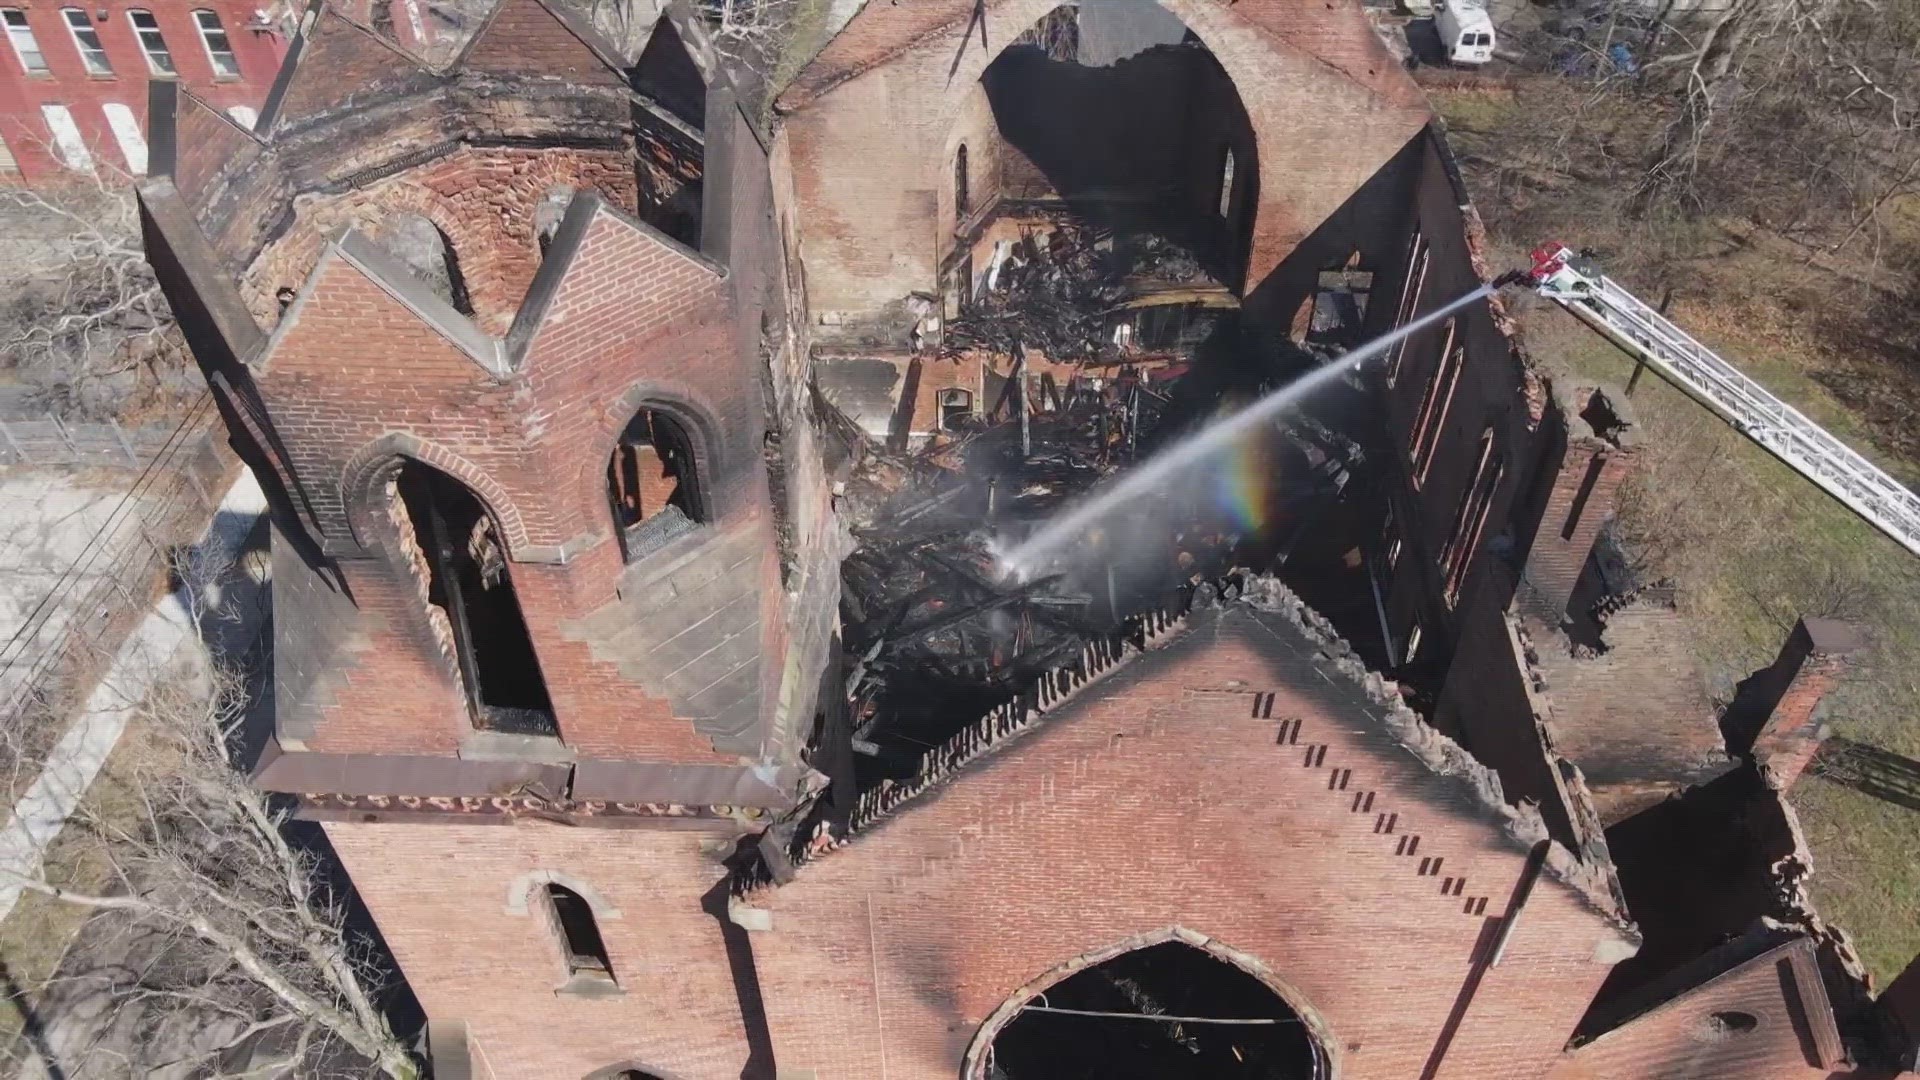 No injuries were reported as firefighters battled flames at the vacant church, built in 1872. The city of Cleveland says it will demolish the building.